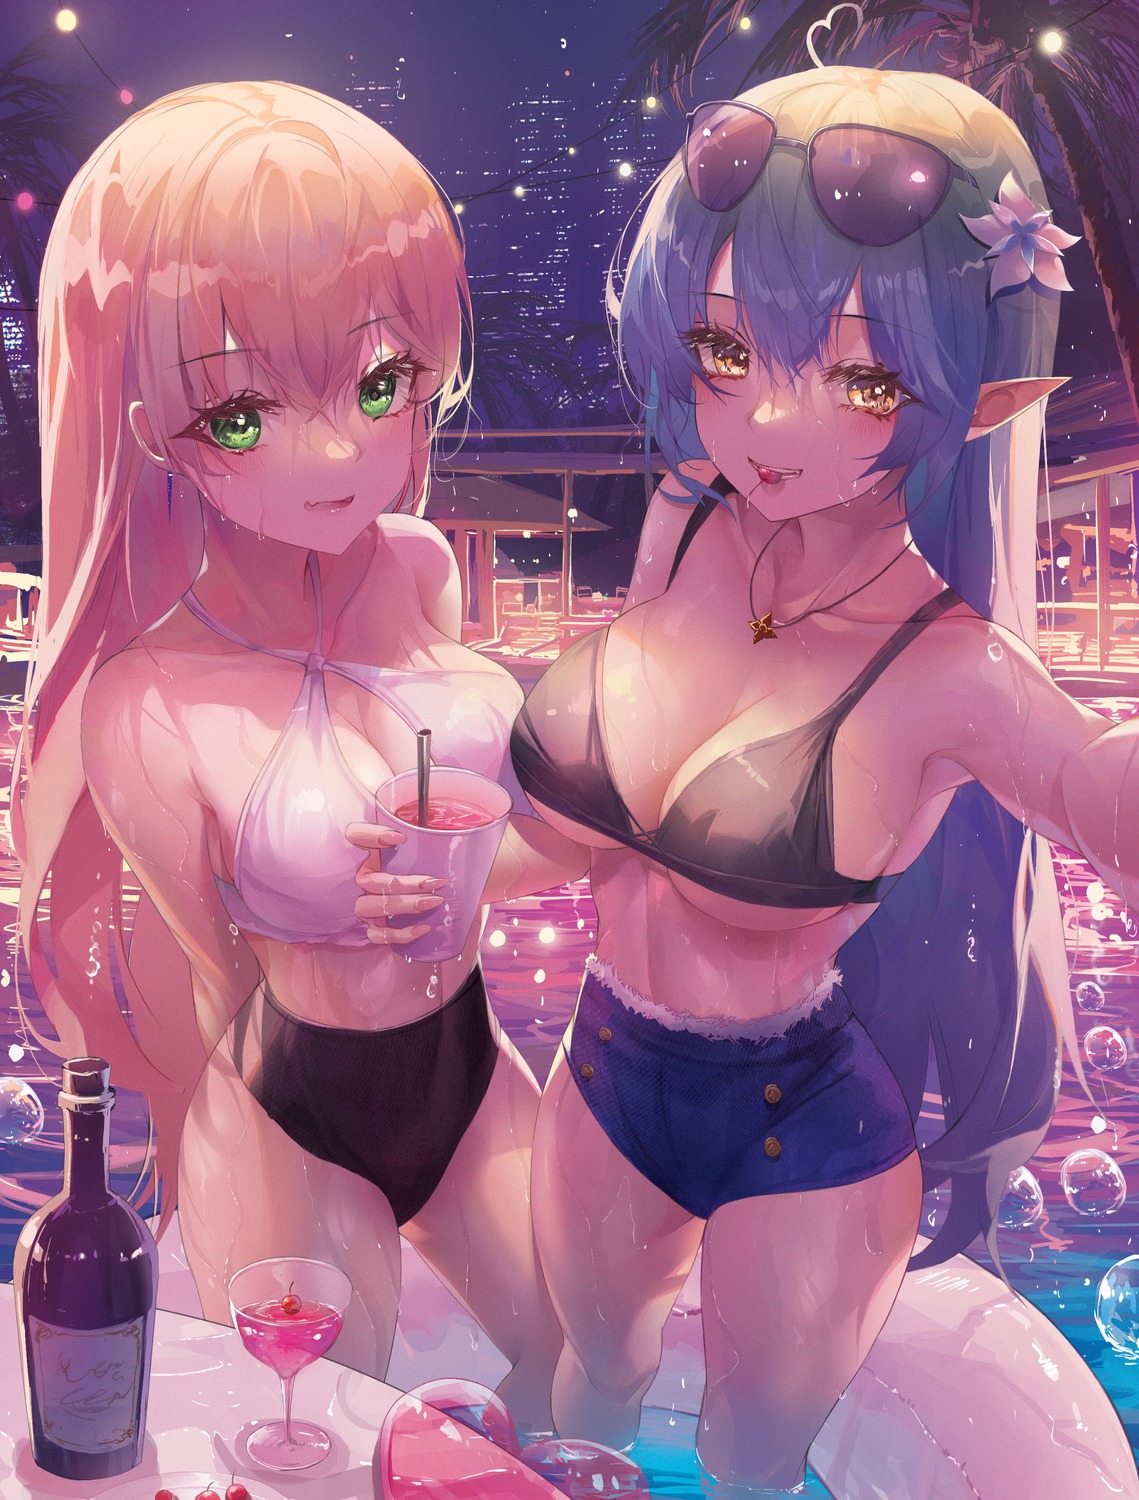 Anime 1139x1500 Momosuzu Nene women Yukihana Lamy water two women Hololive Virtual Youtuber wet anime girls big boobs portrait display night swimming pool selfies T_blence long hair swimwear bikini short shorts blonde blue hair sunglasses glasses green eyes blushing yellow eyes cleavage drink alcohol cup pointy ears flower in hair flowers palm trees bubbles city lights ahoge cherries wine wine glass floater standing in water smiling looking at viewer jean shorts heart fruit women outdoors thighs necklace outdoors bottles hair ornament city cityscape night sky lights cocktails wet body armpits